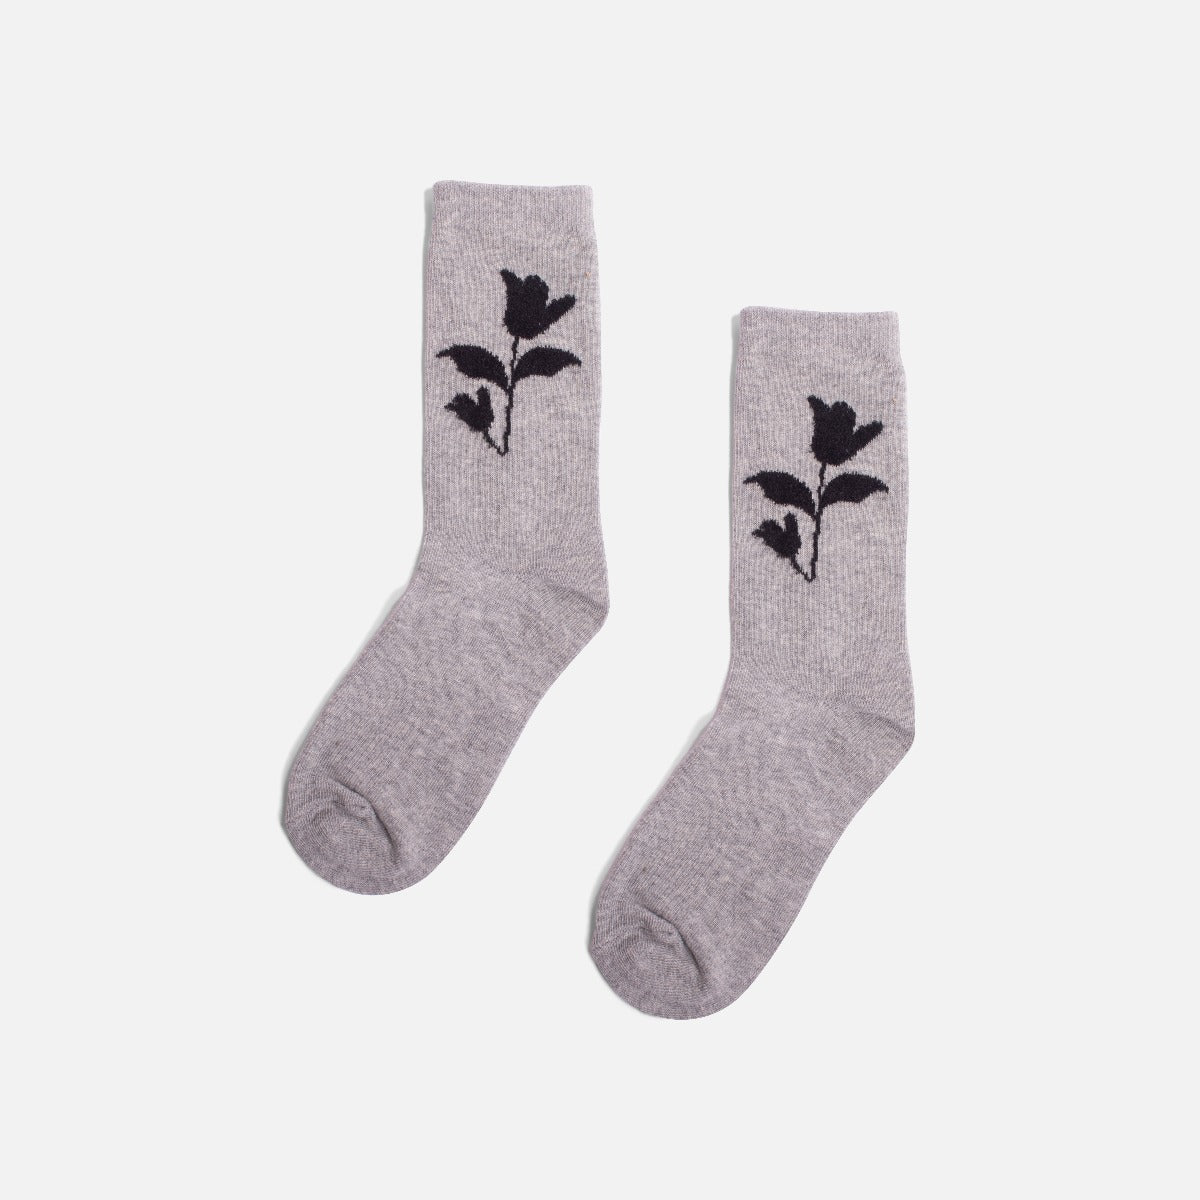 Grey socks with black flowers embroidery effect